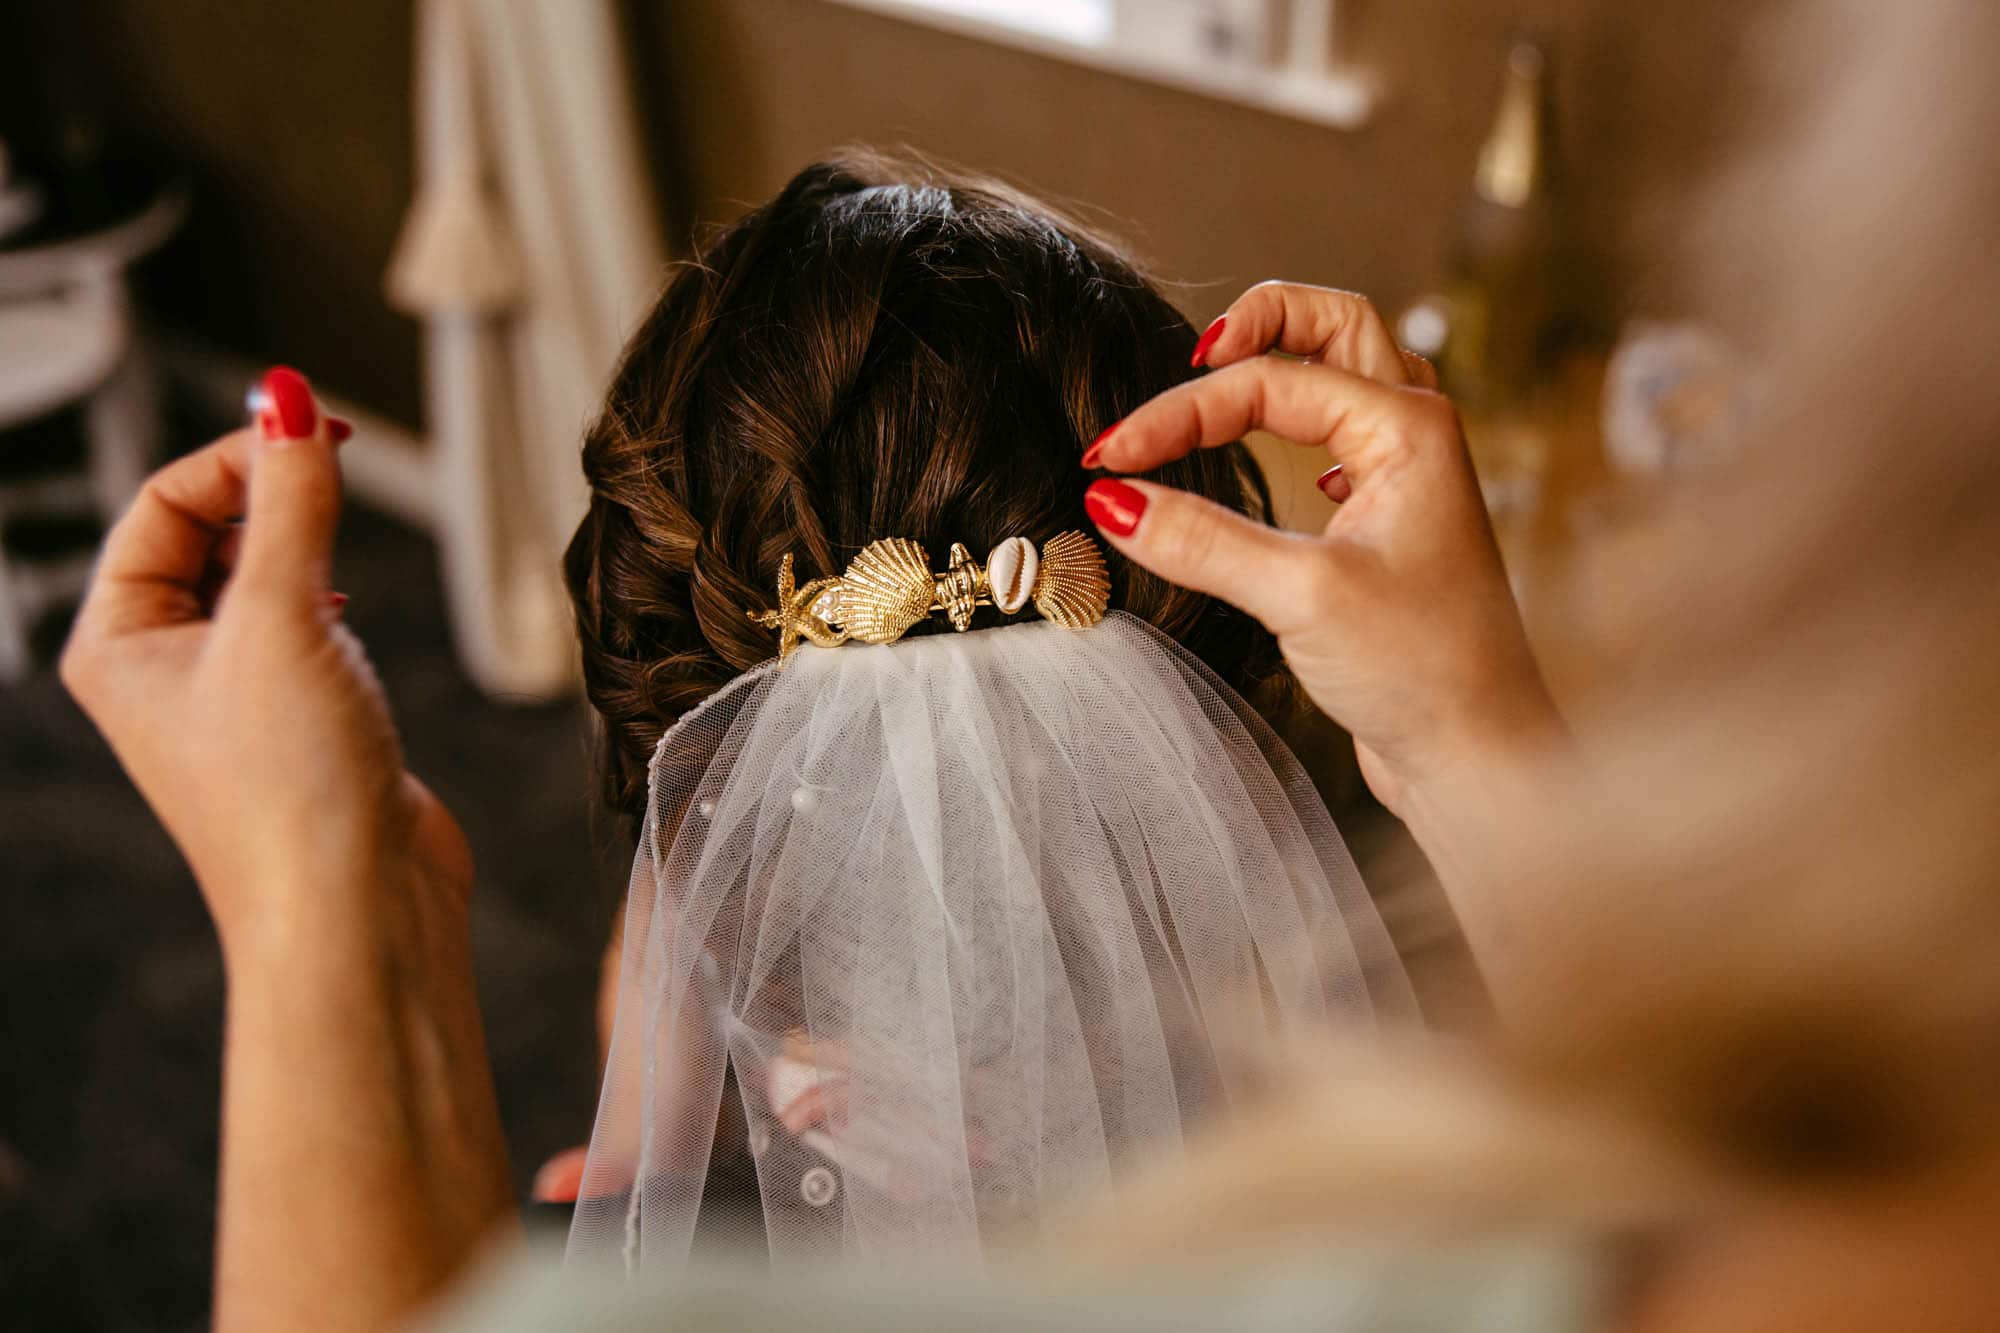 A bride putting on her veil in front of a mirror.